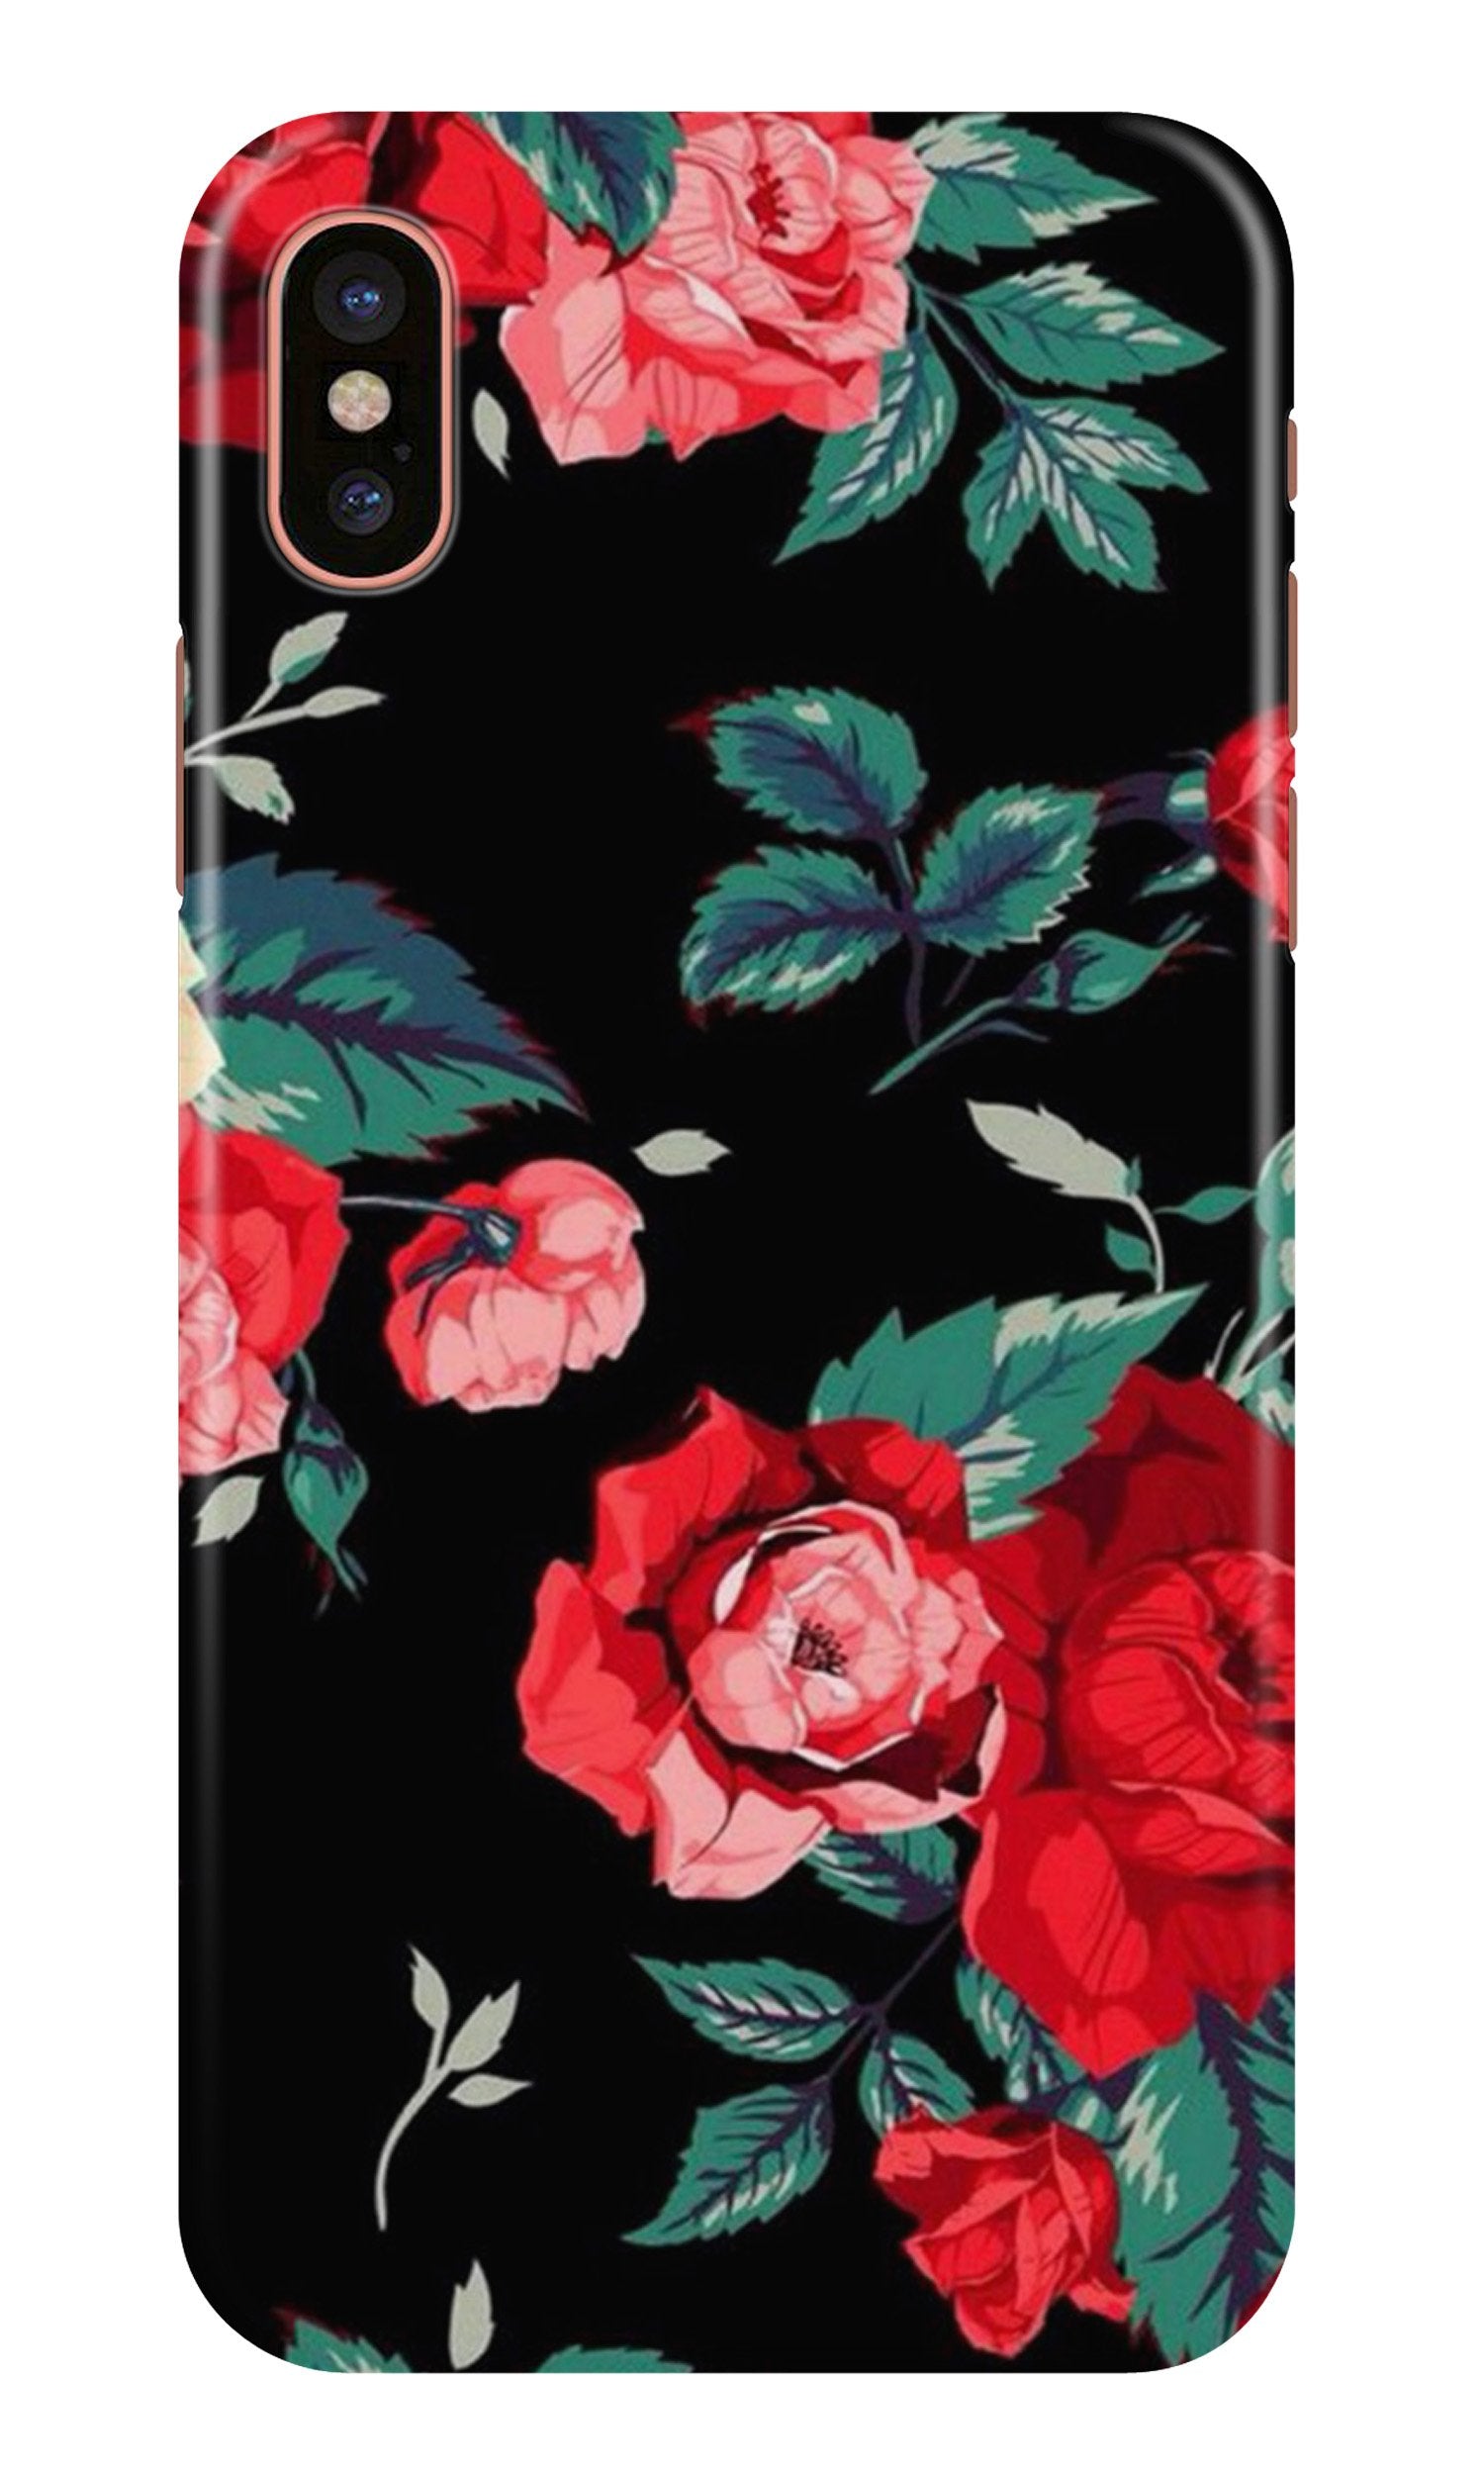 Red Rose2 Case for iPhone Xr